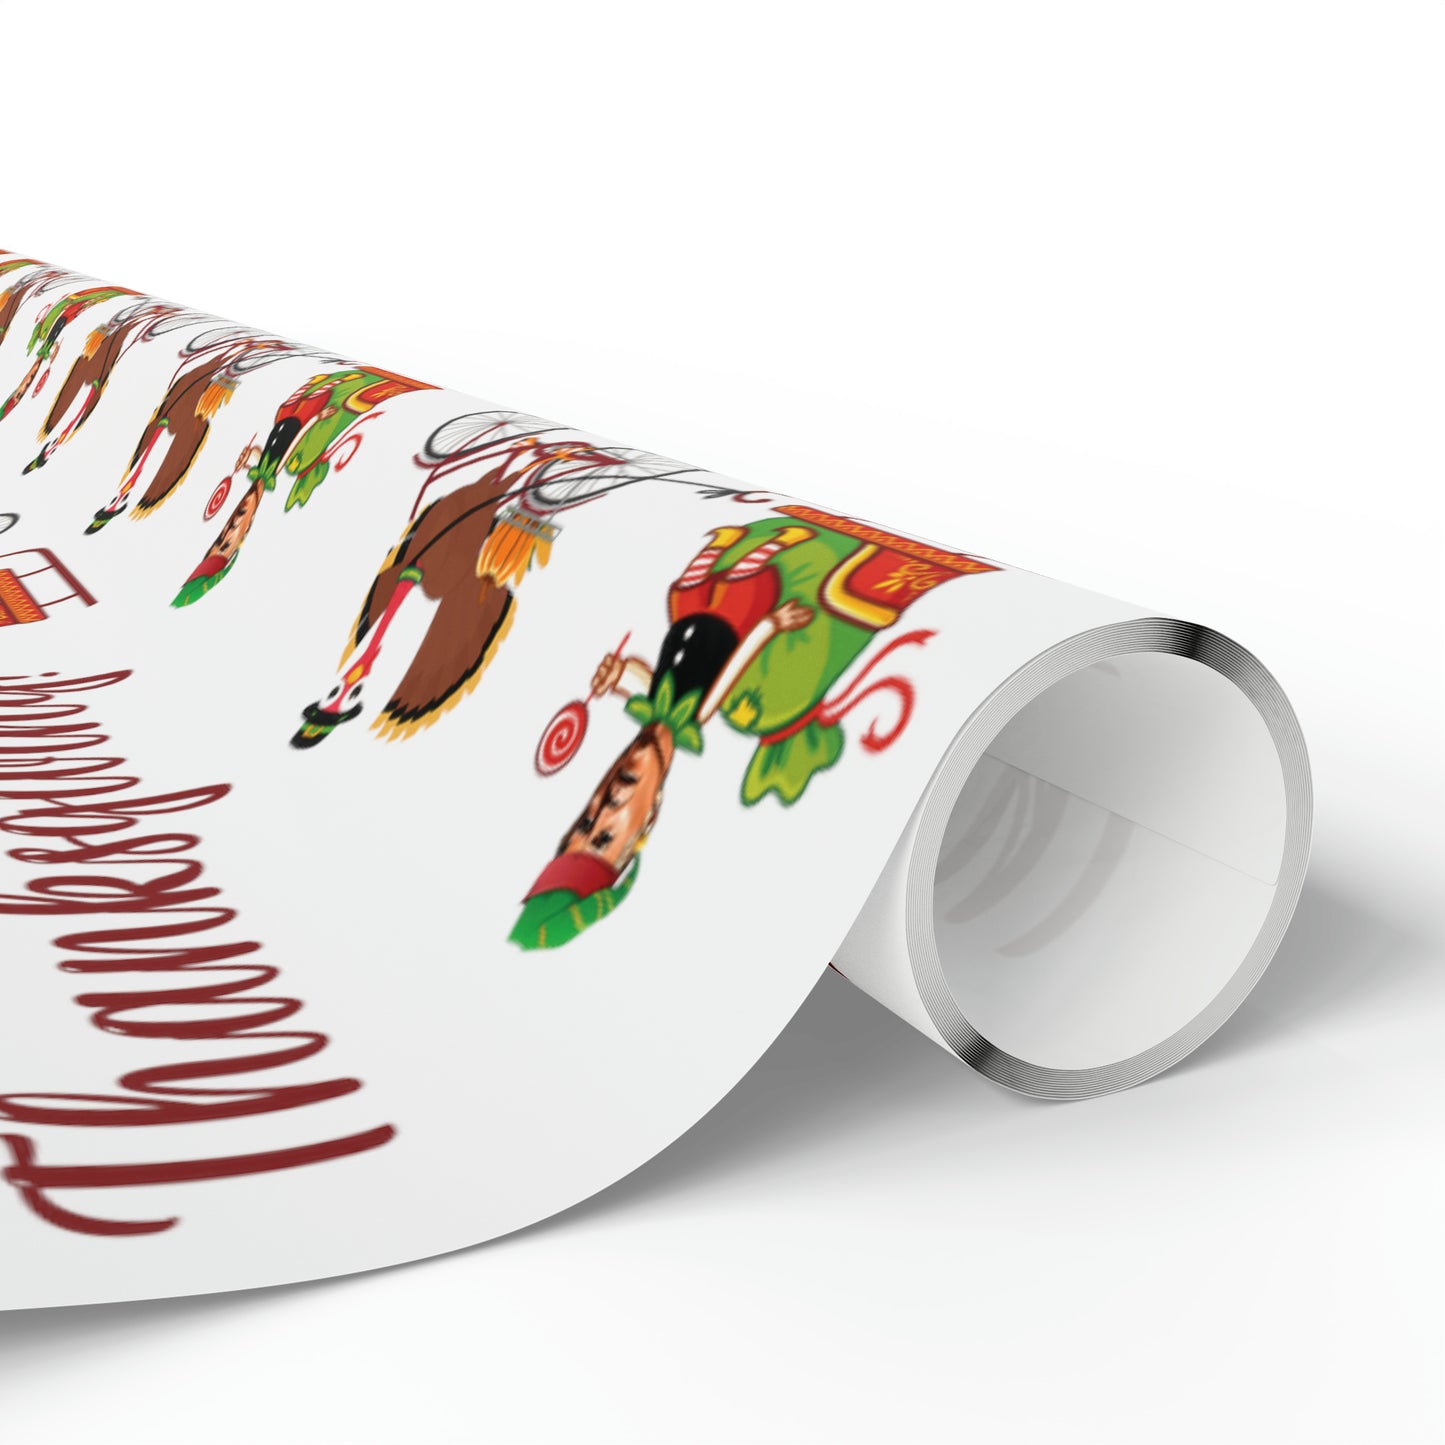 Hilarious Biden Confused Christmas Wrapping Paper for Gifts Biden Merry 4th of Thanksgiving